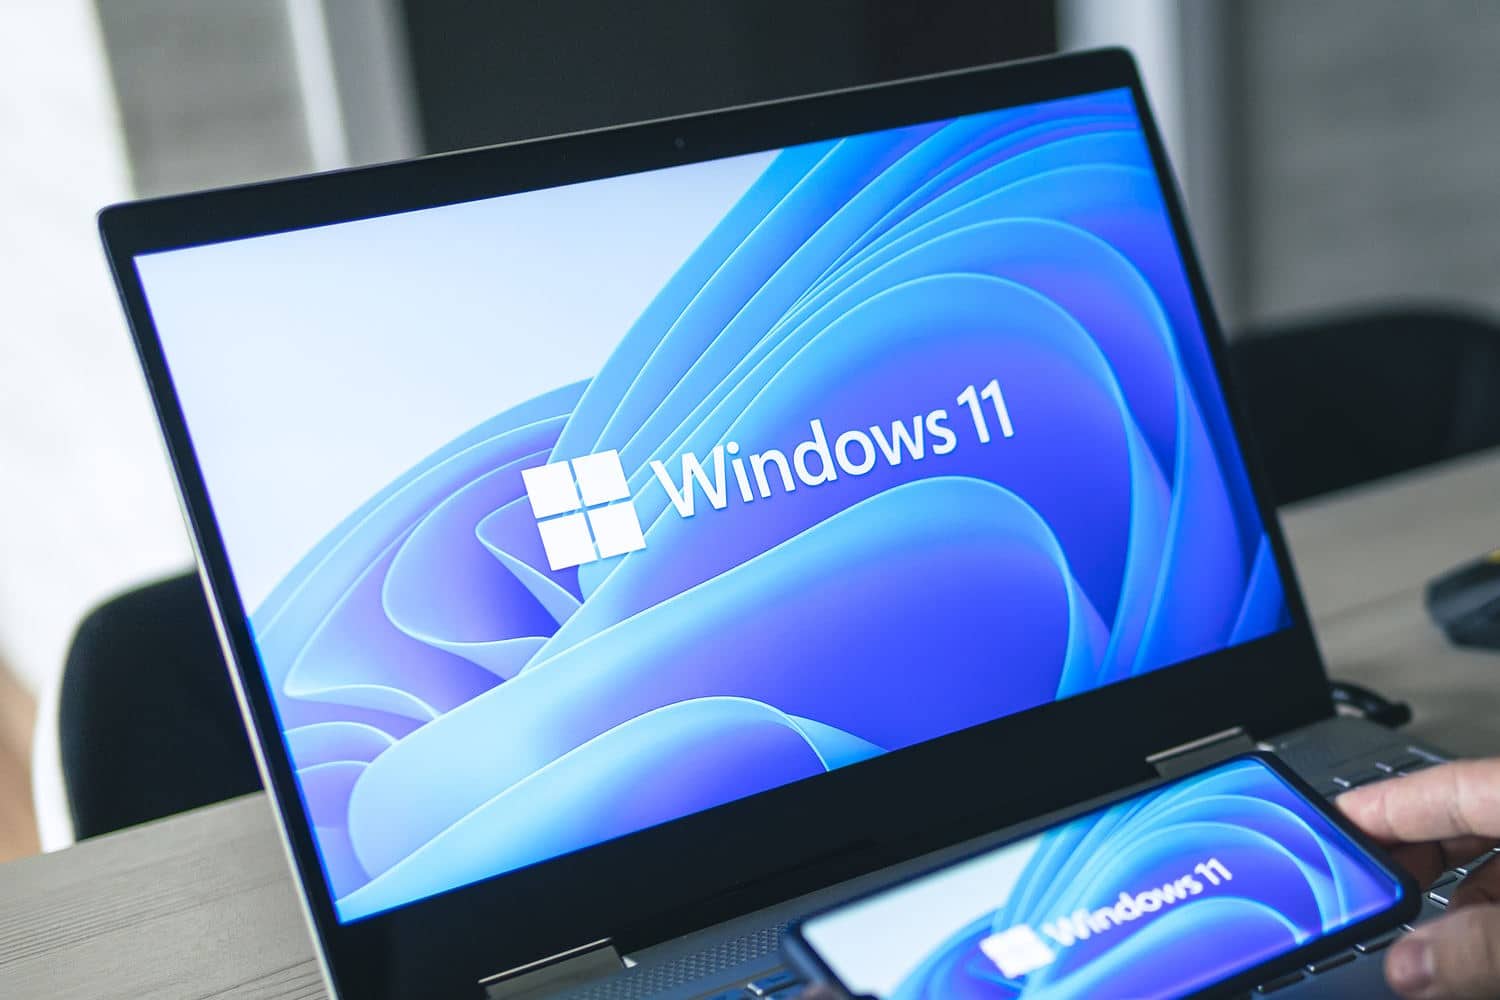 How to download a Windows 11 23H2 ISO from Microsoft